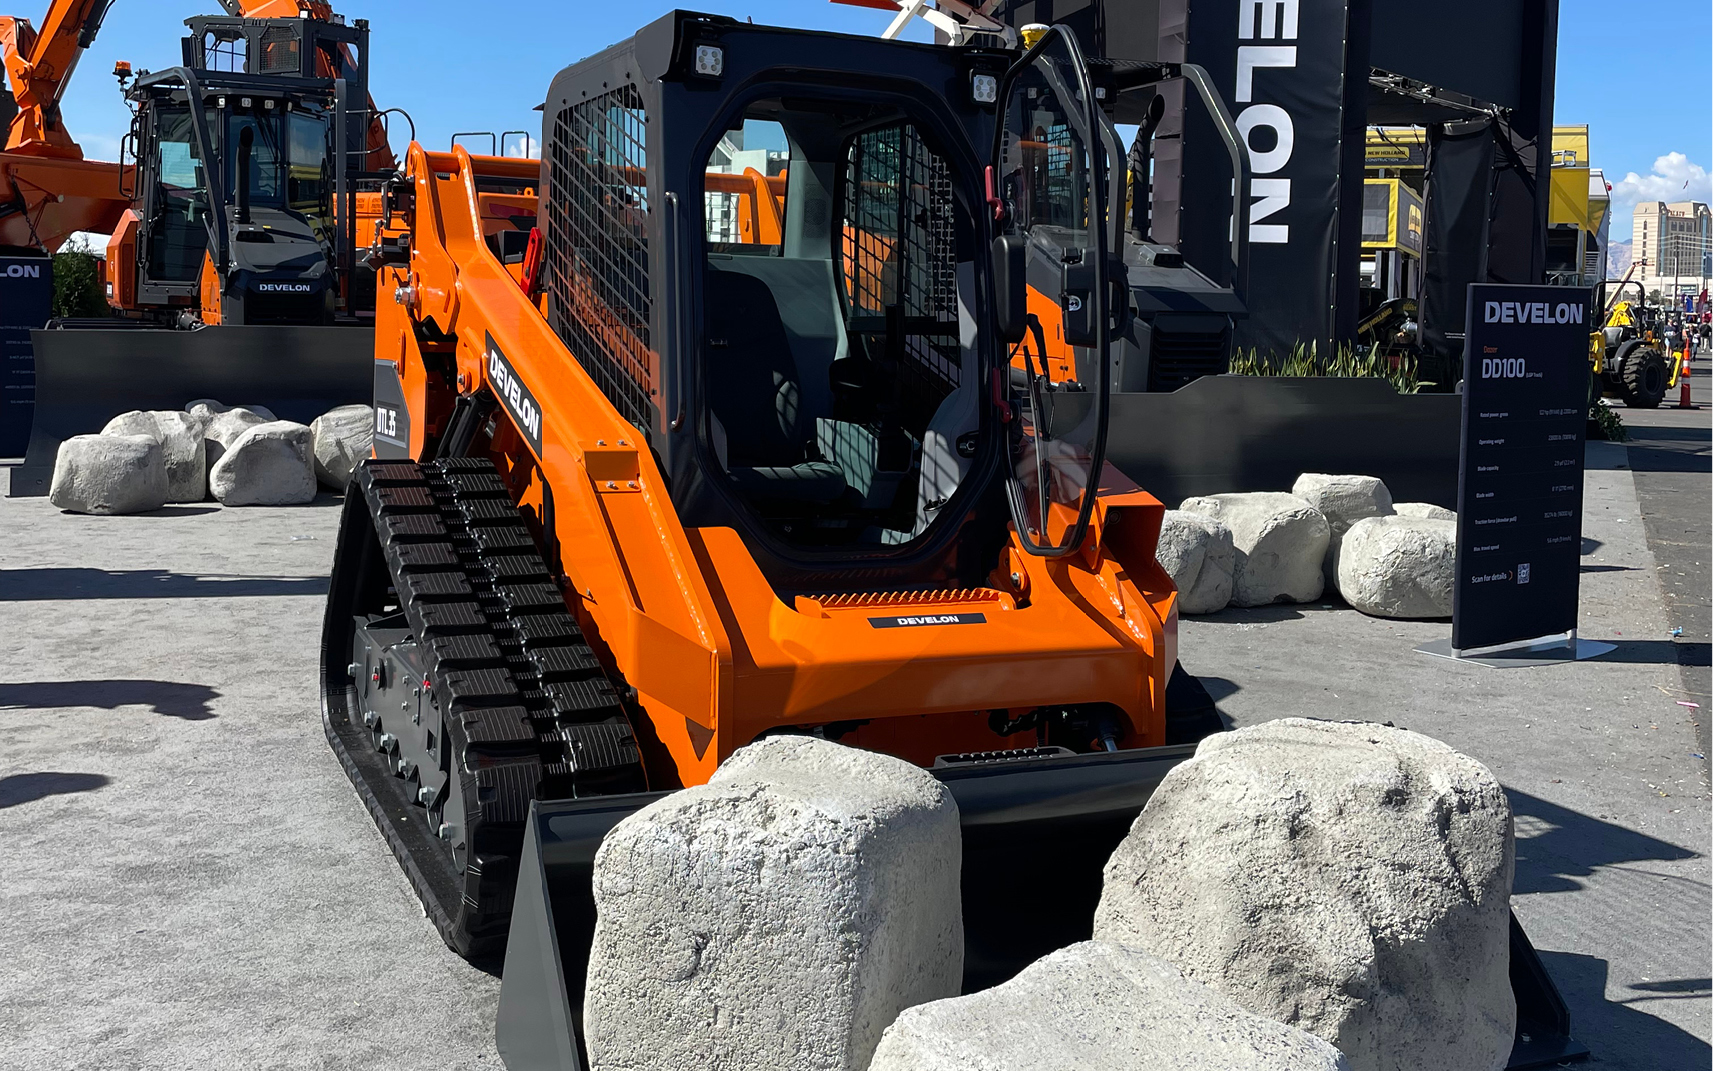 A picture of a DEVELON compact track loader with a bucket attachment on display at CONEXPO-CON/AGG.